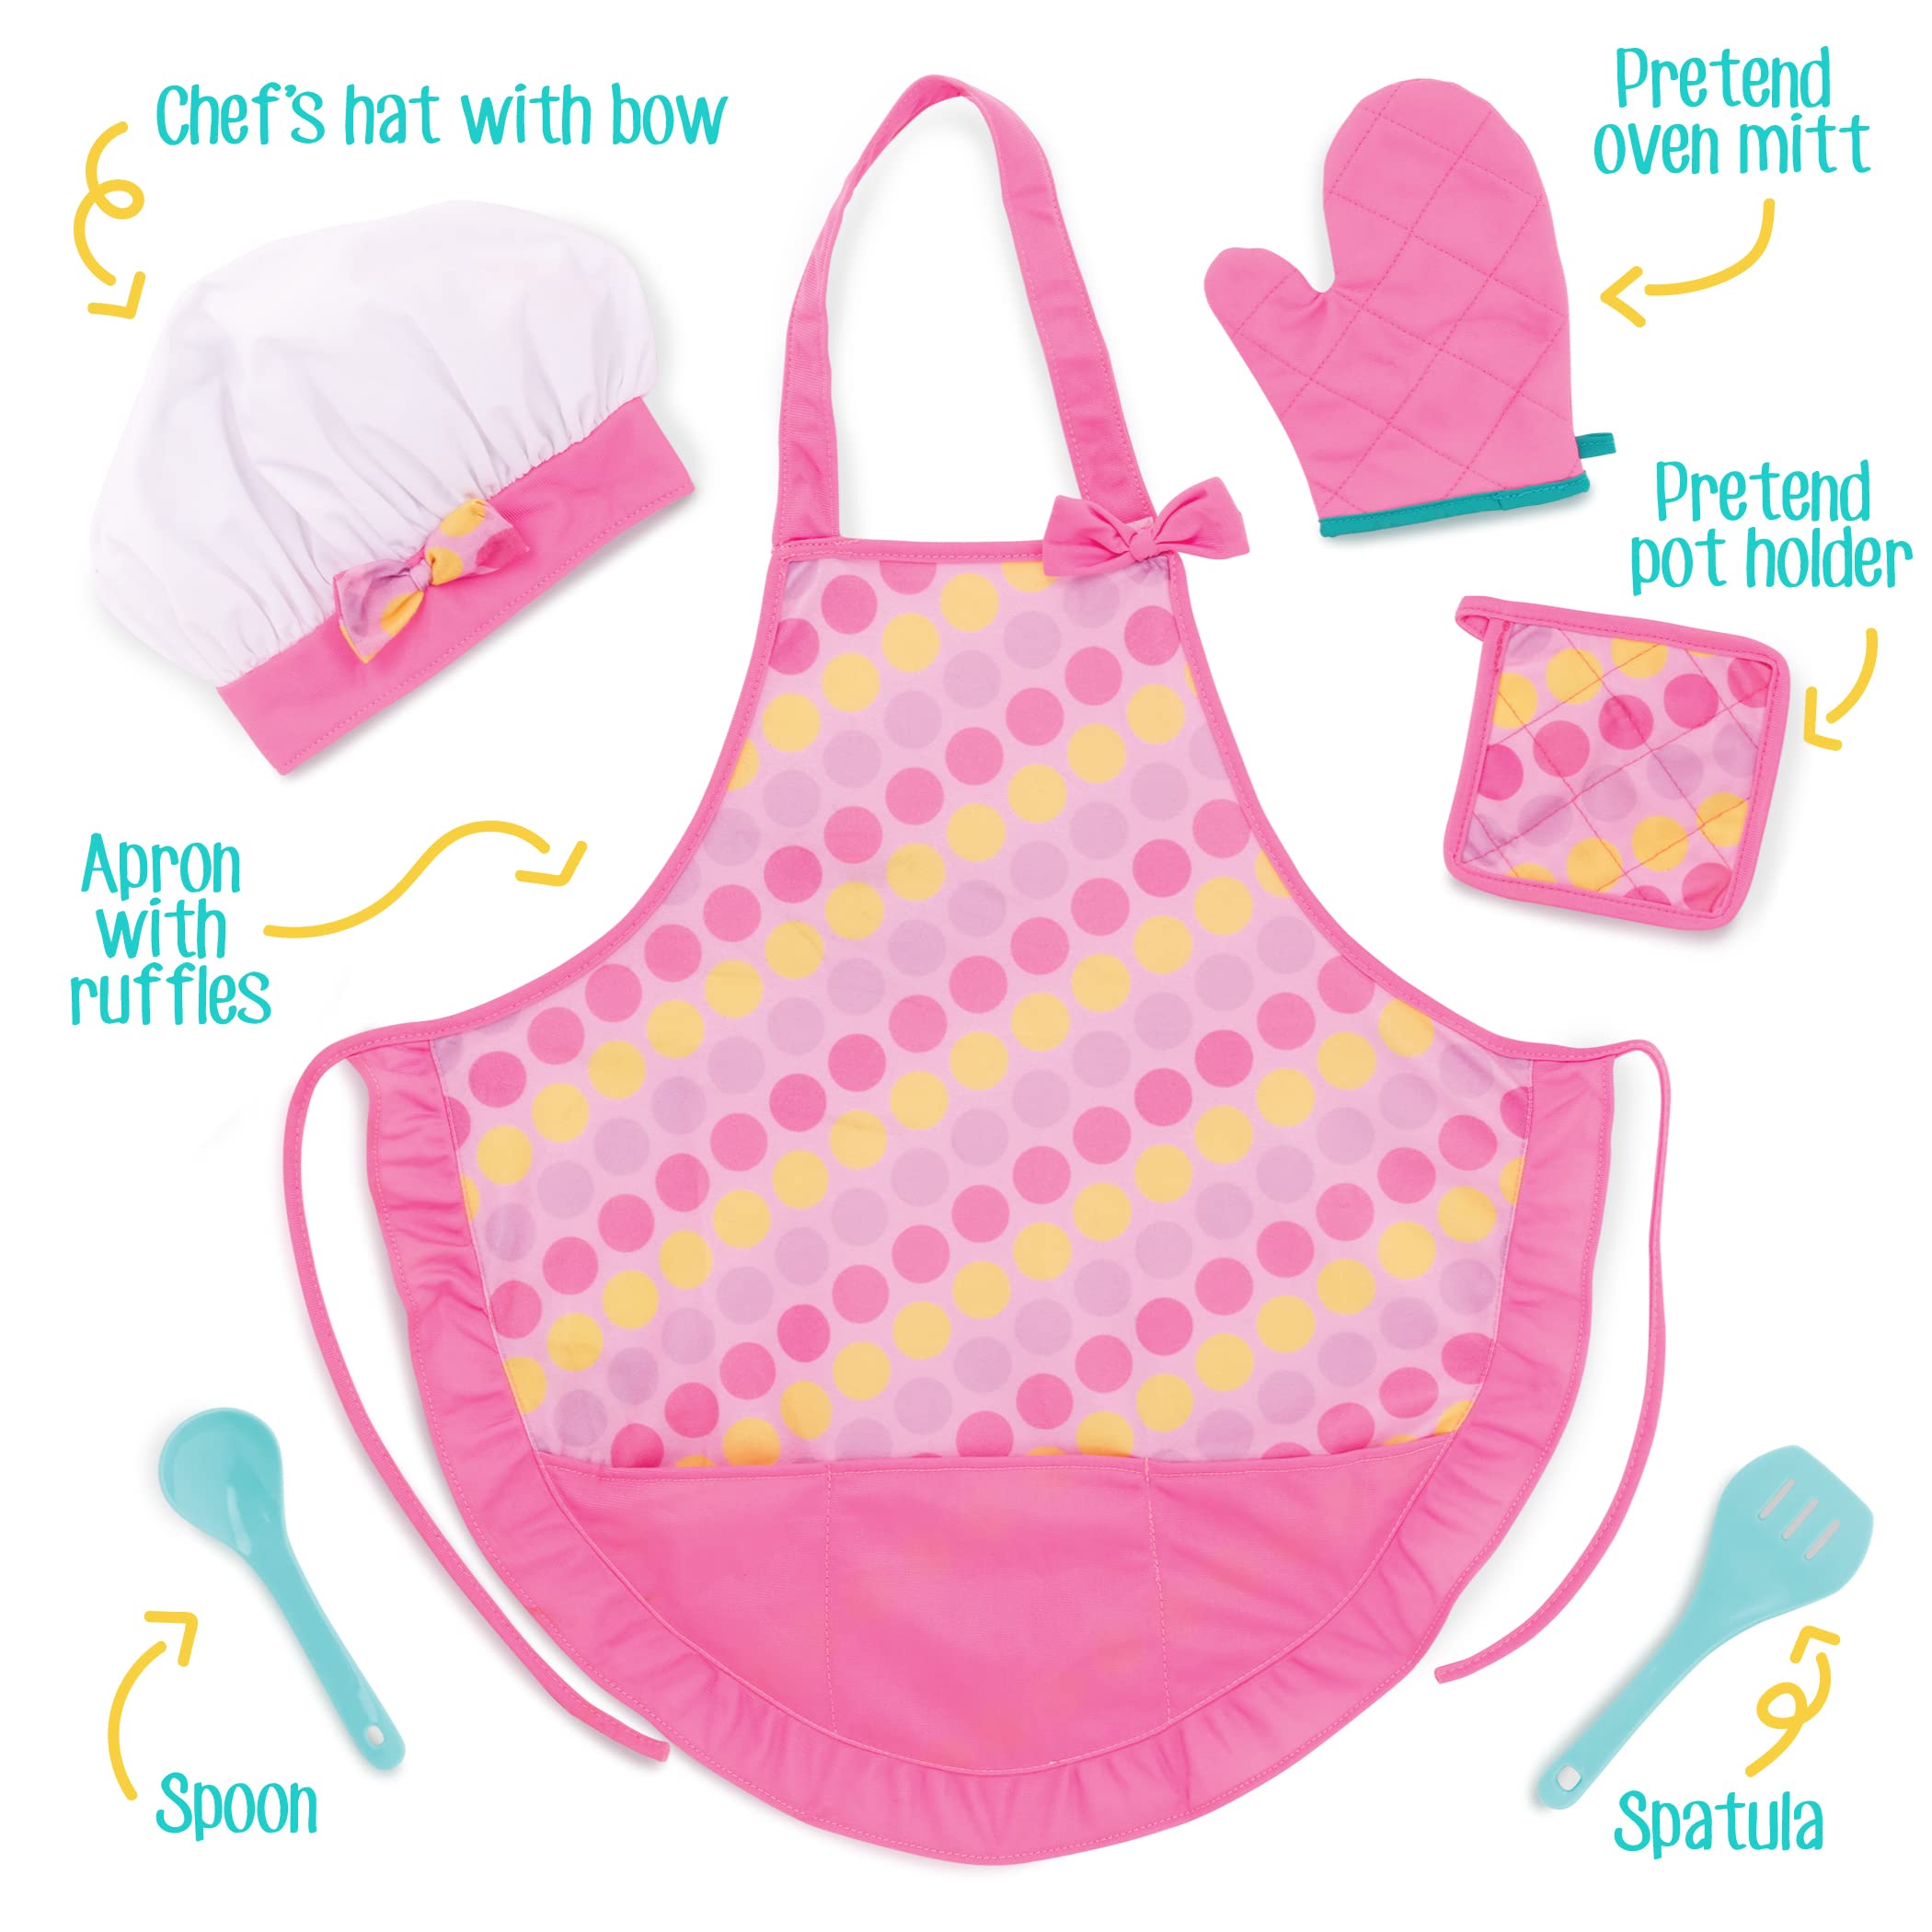 Play Circle by Battat – Smart Cookie Chef’s Apron – Chef Hat and Matching Pink Apron with Toy Cooking & Baking Accessories – Pretend Play House & Kitchen Set for Kids Ages 3 and Up (6 Pieces)